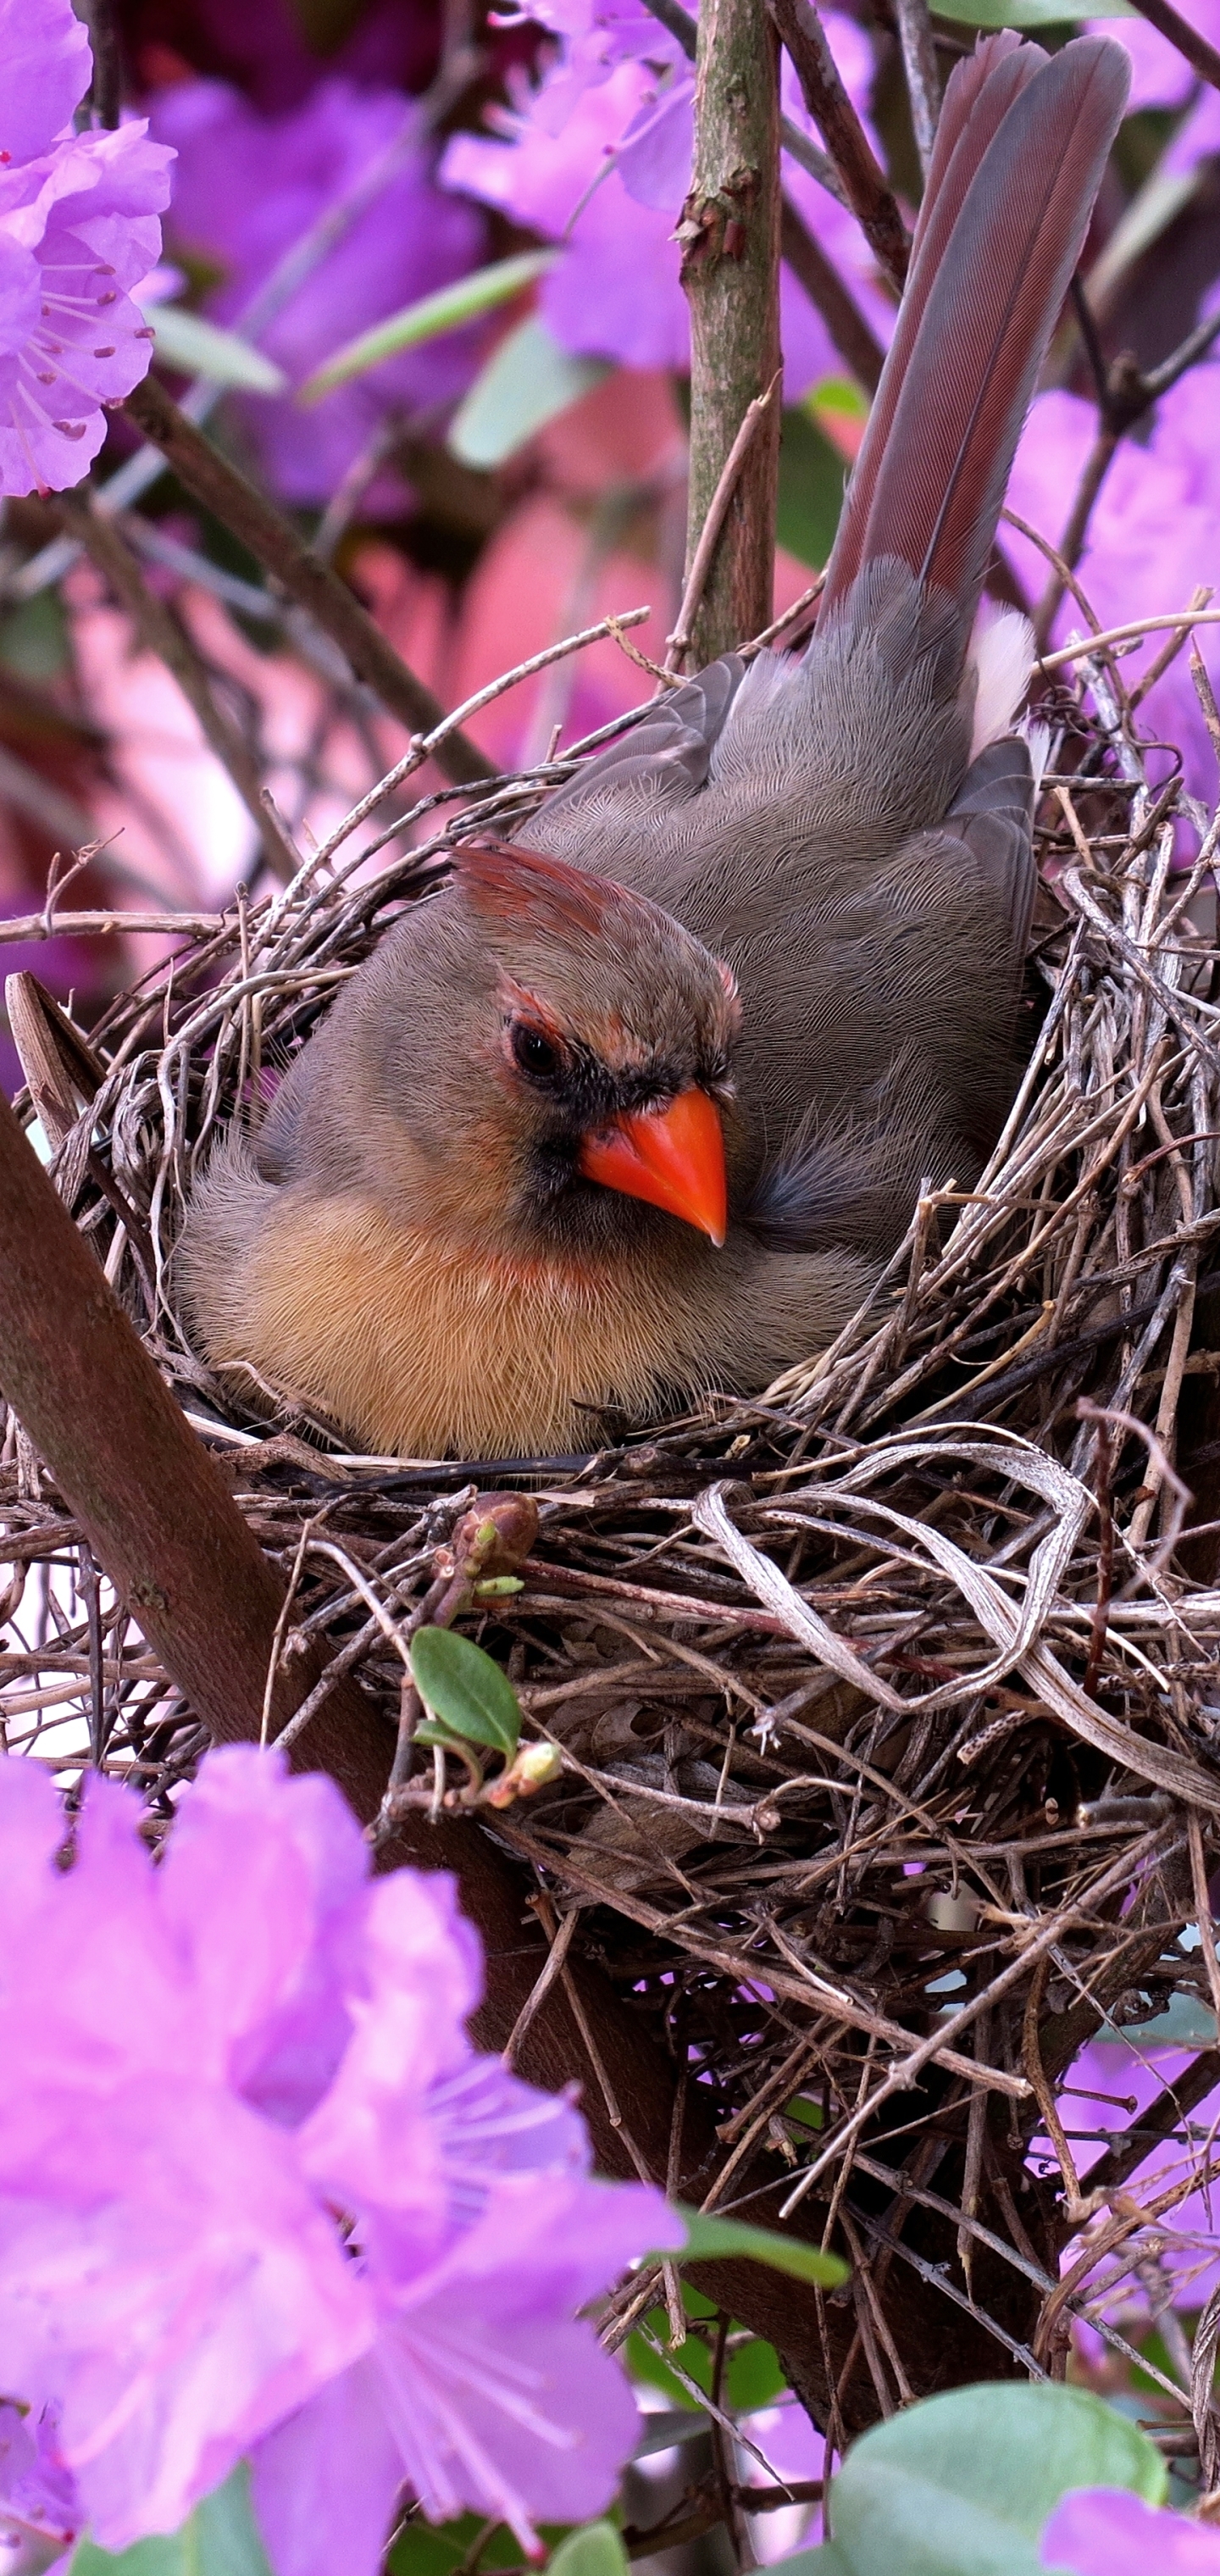 Cardinal in Her Nest